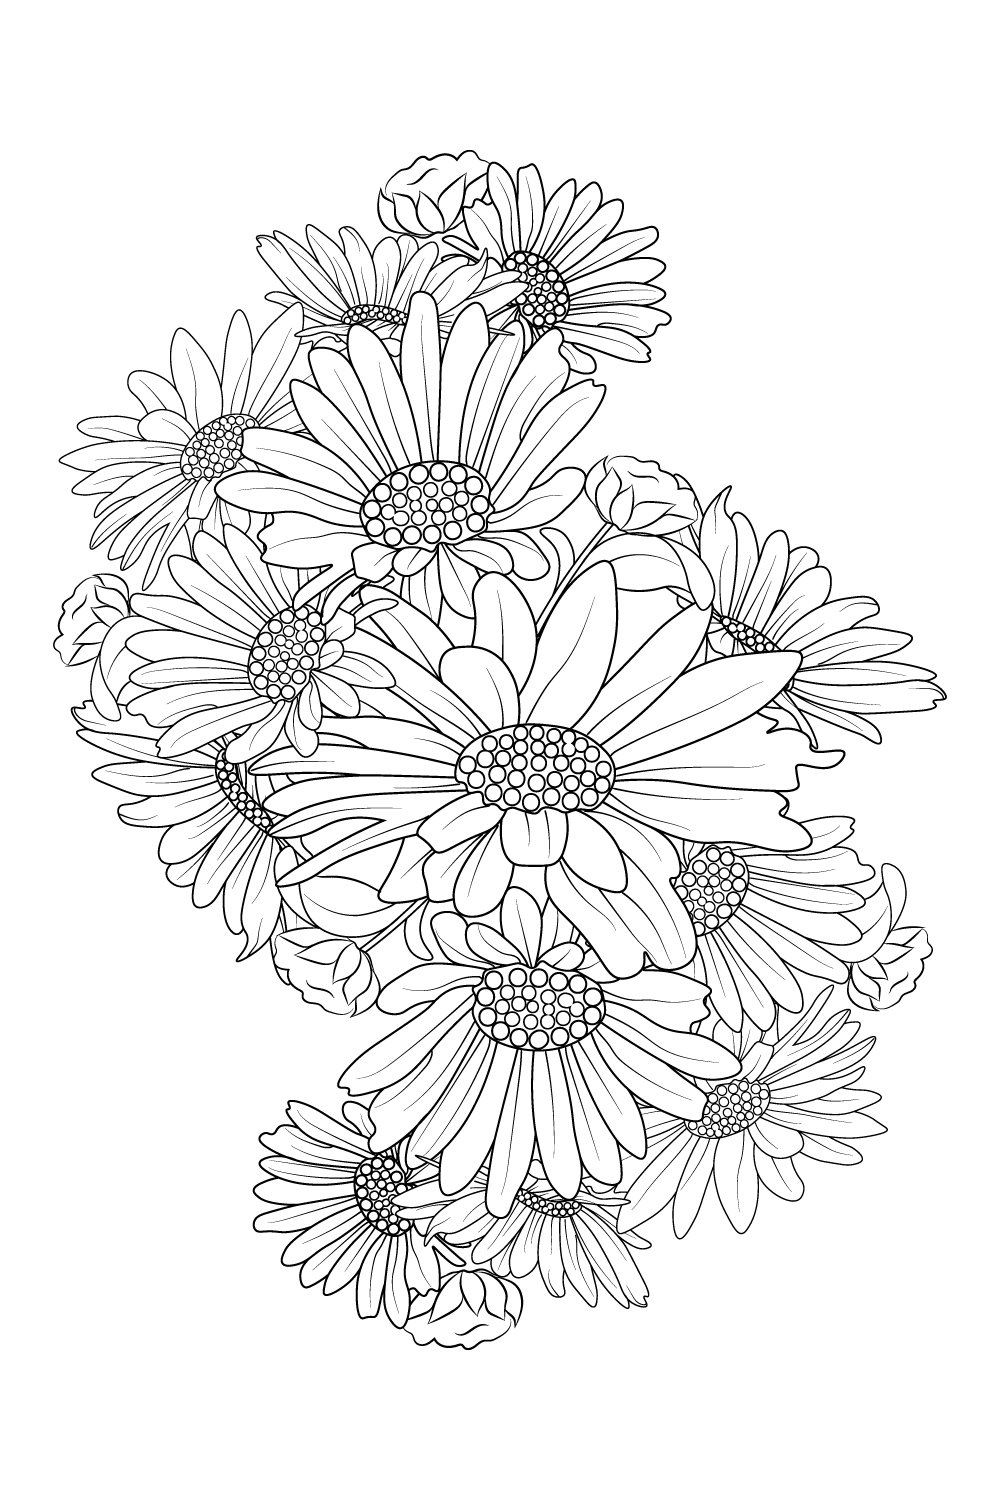 zentangle tattoo design with daisy flowers, relaxation flower coloring pages for adults, pinterest preview image.